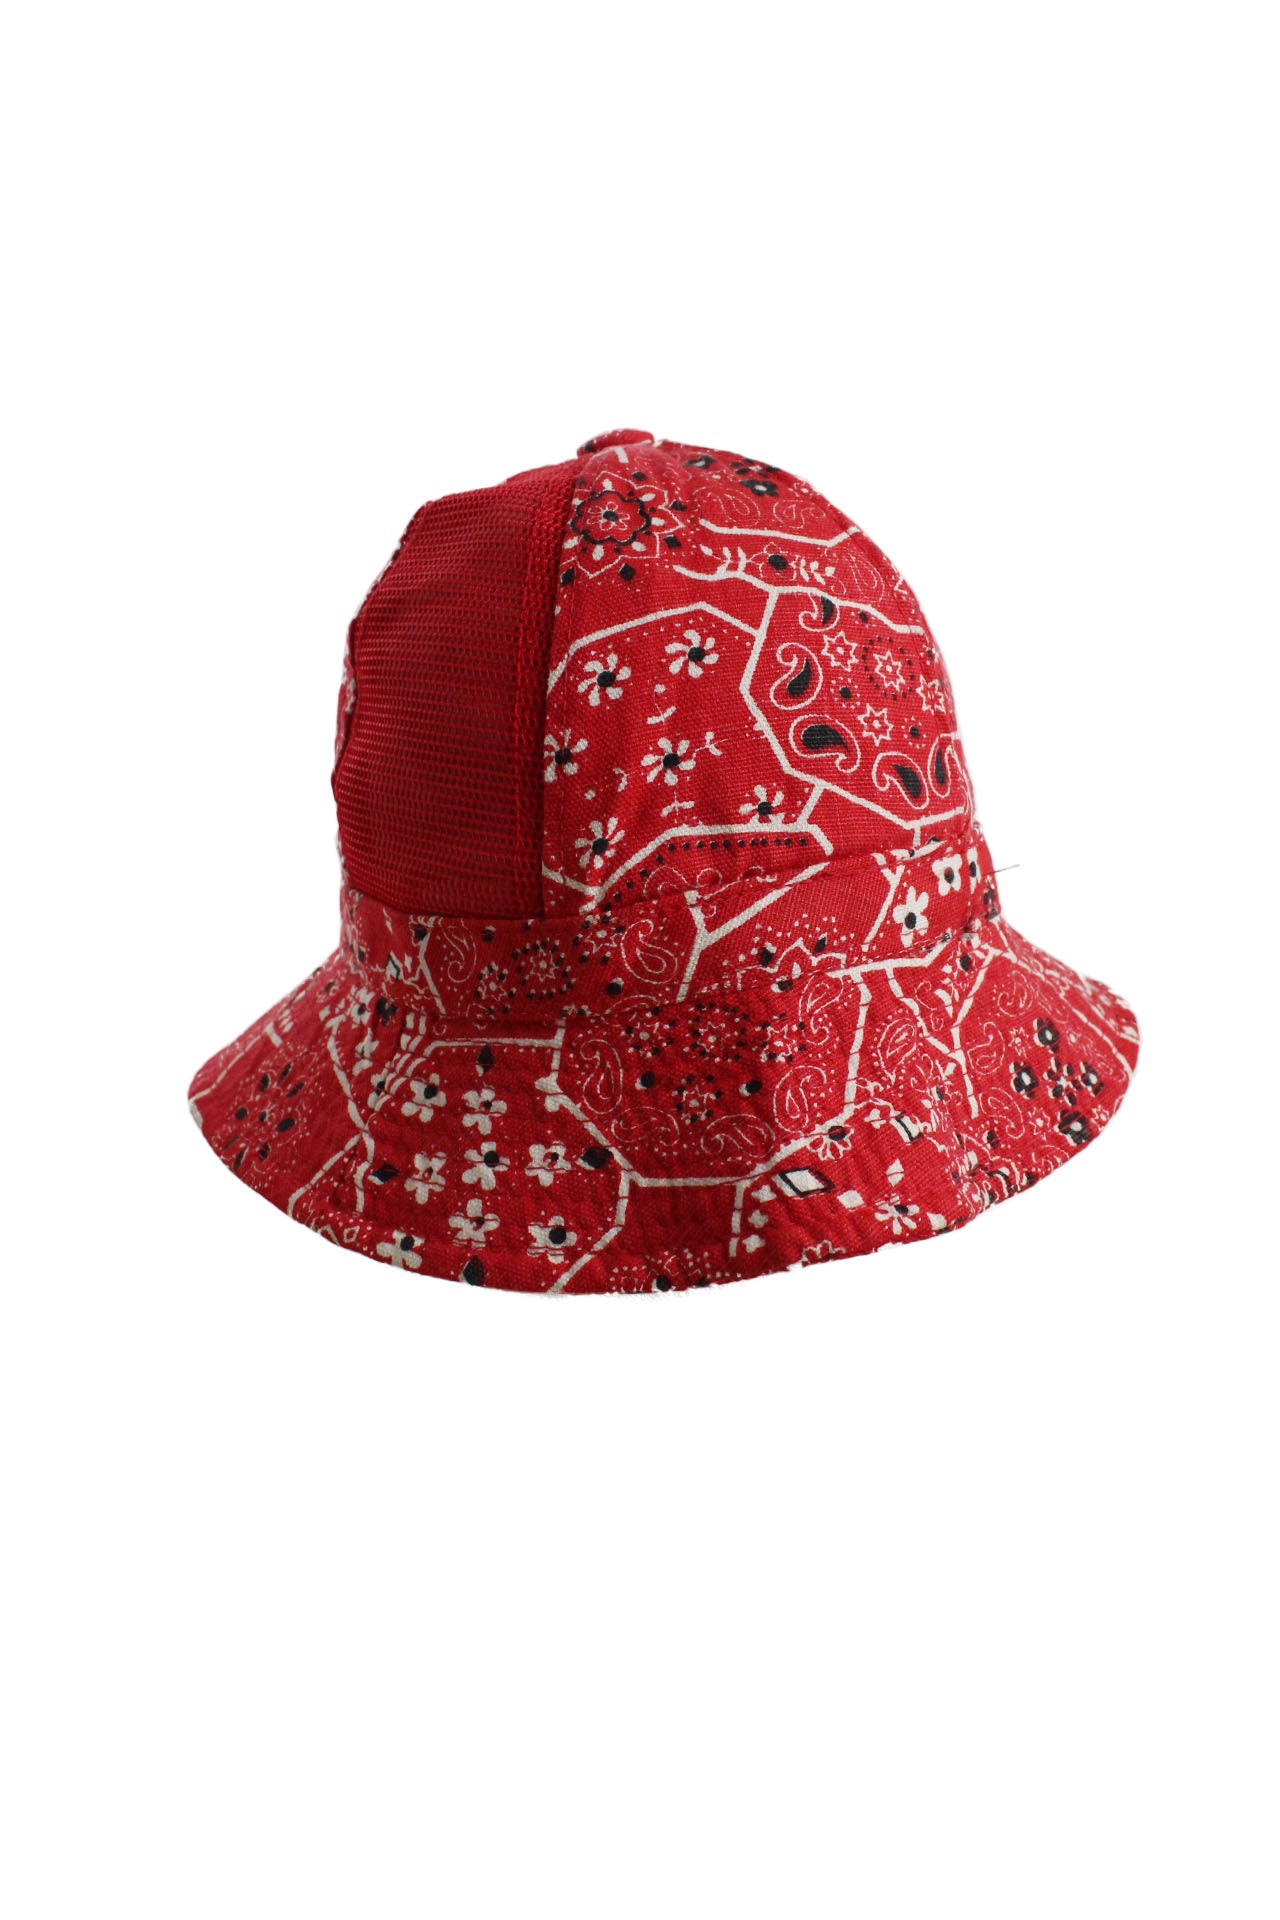 rear view with mesh panel of bucket hat.